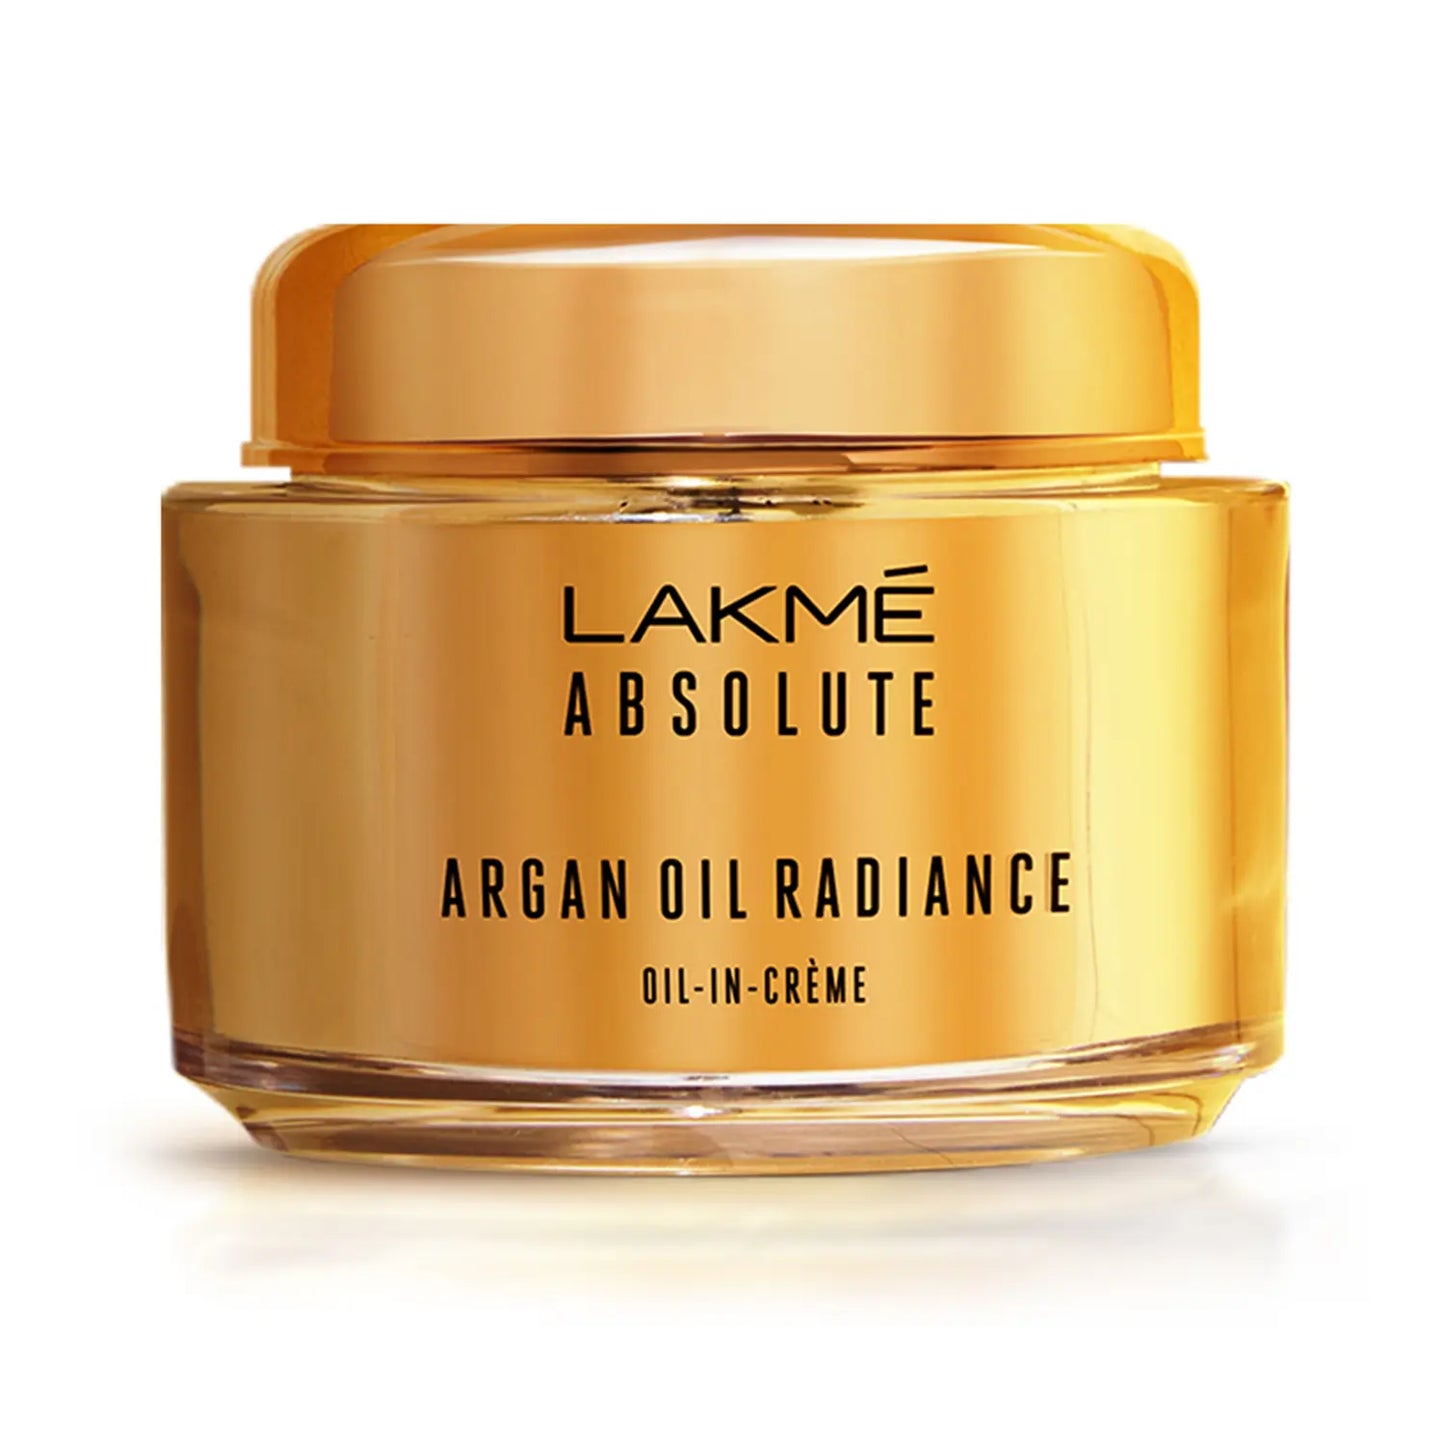 Lakme Absolute Argan Oil Radiance Oil-In-Creme (50g)